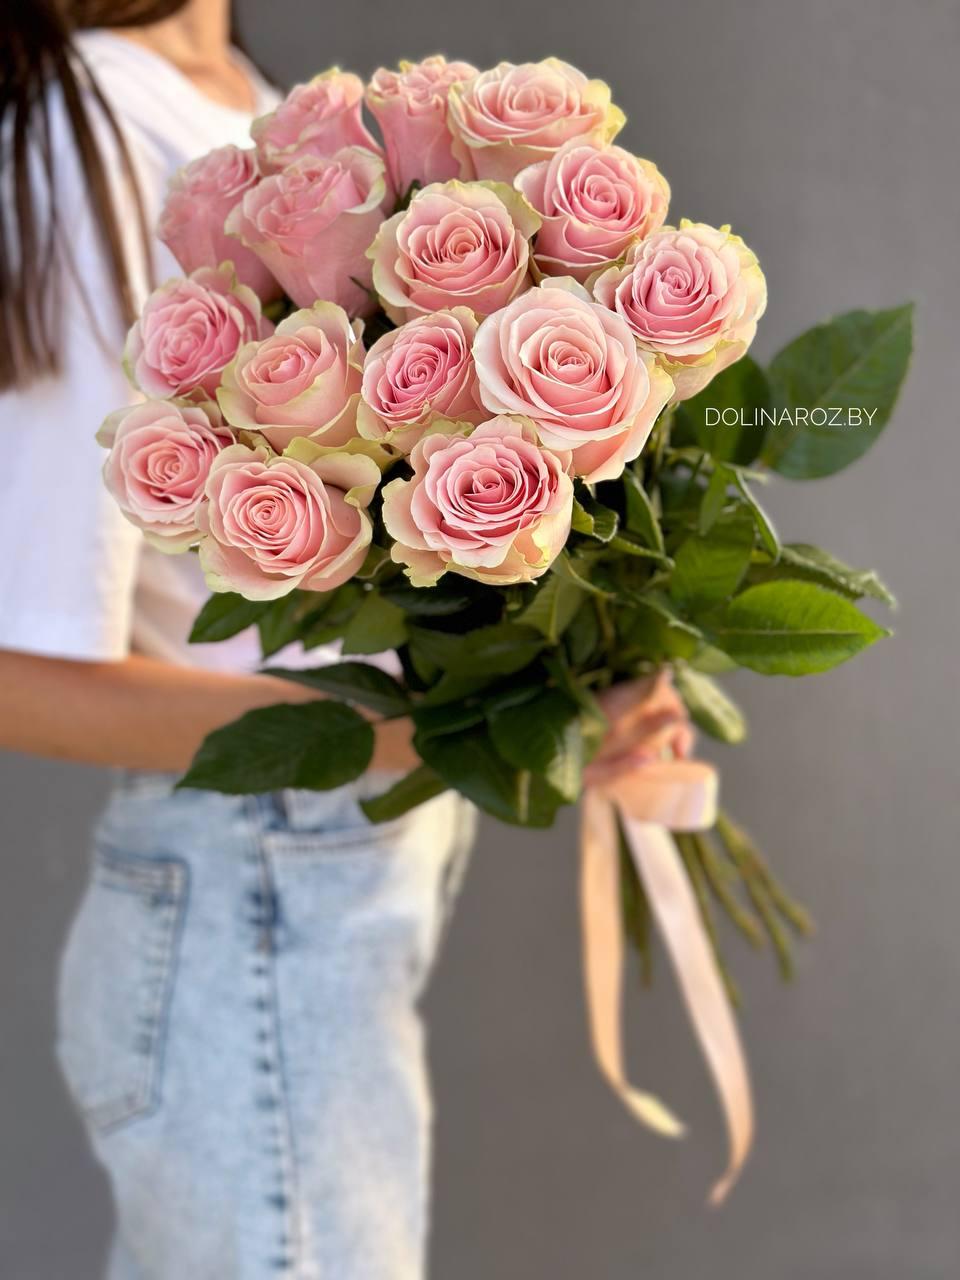 Bouquet of roses "Eternal passion"